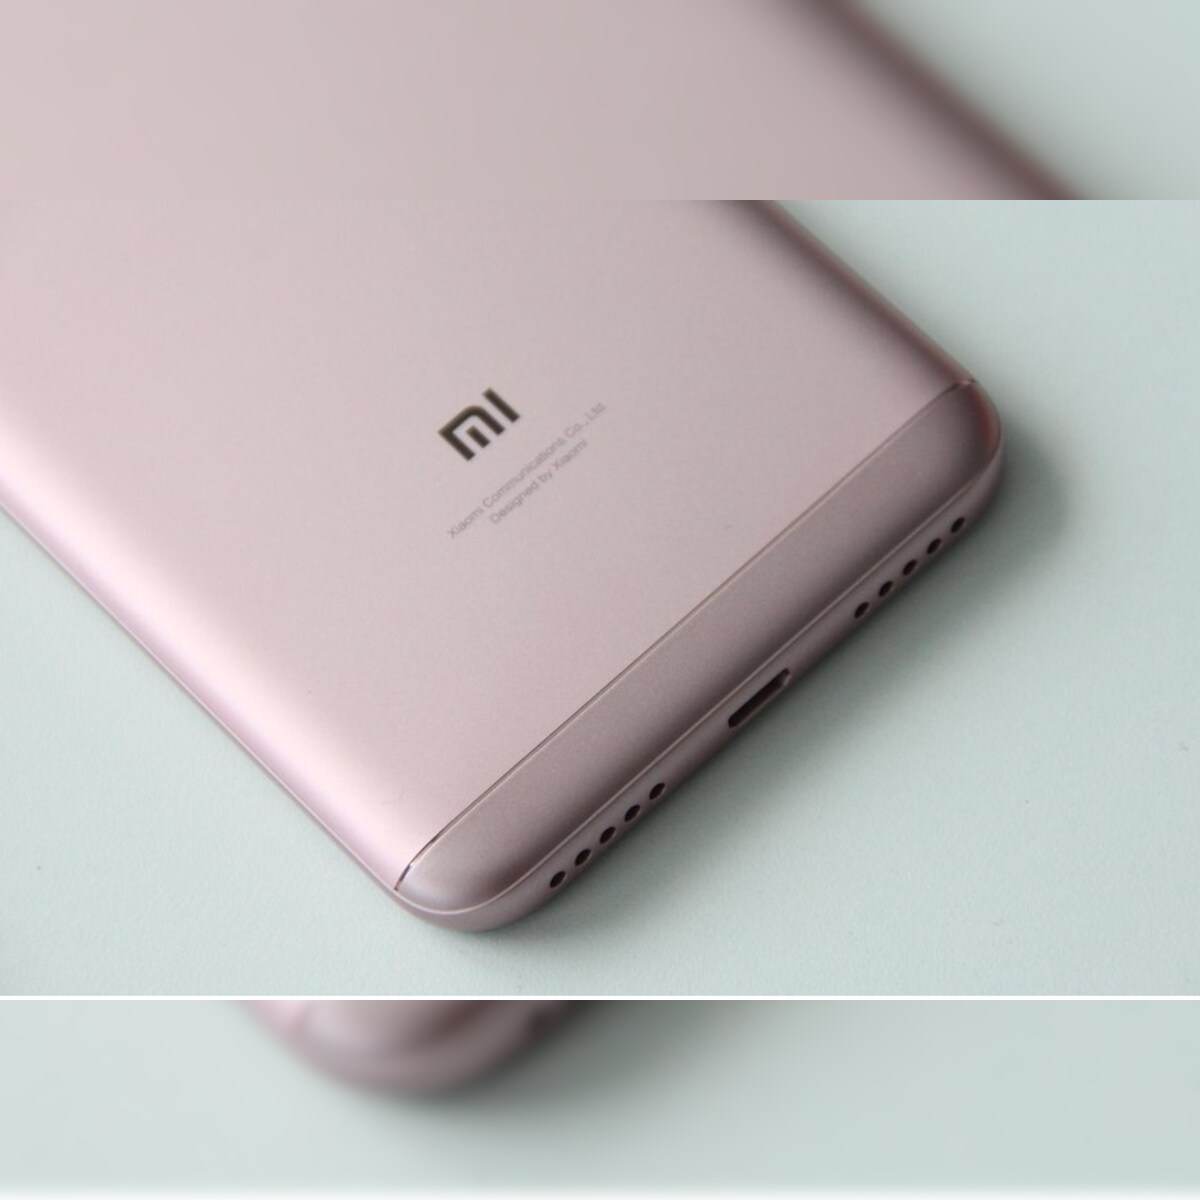 Xiaomi Announces Seventh Manufacturing Plant In India As Part Of Make In India Initiative